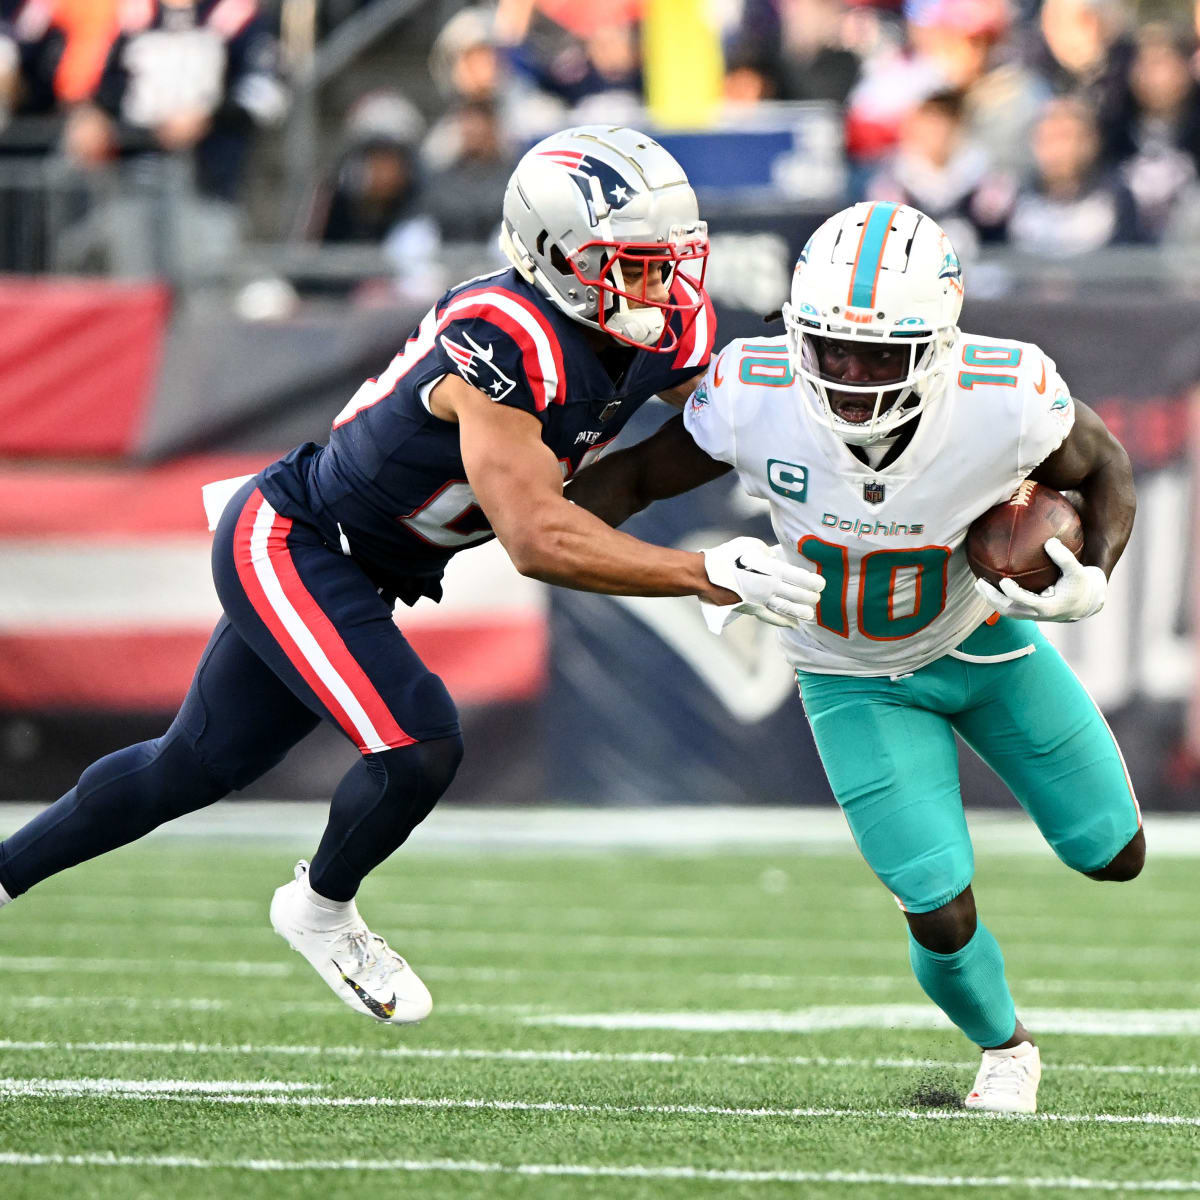 NFL Week 2: How to watch tonight's Miami Dolphins vs. New England